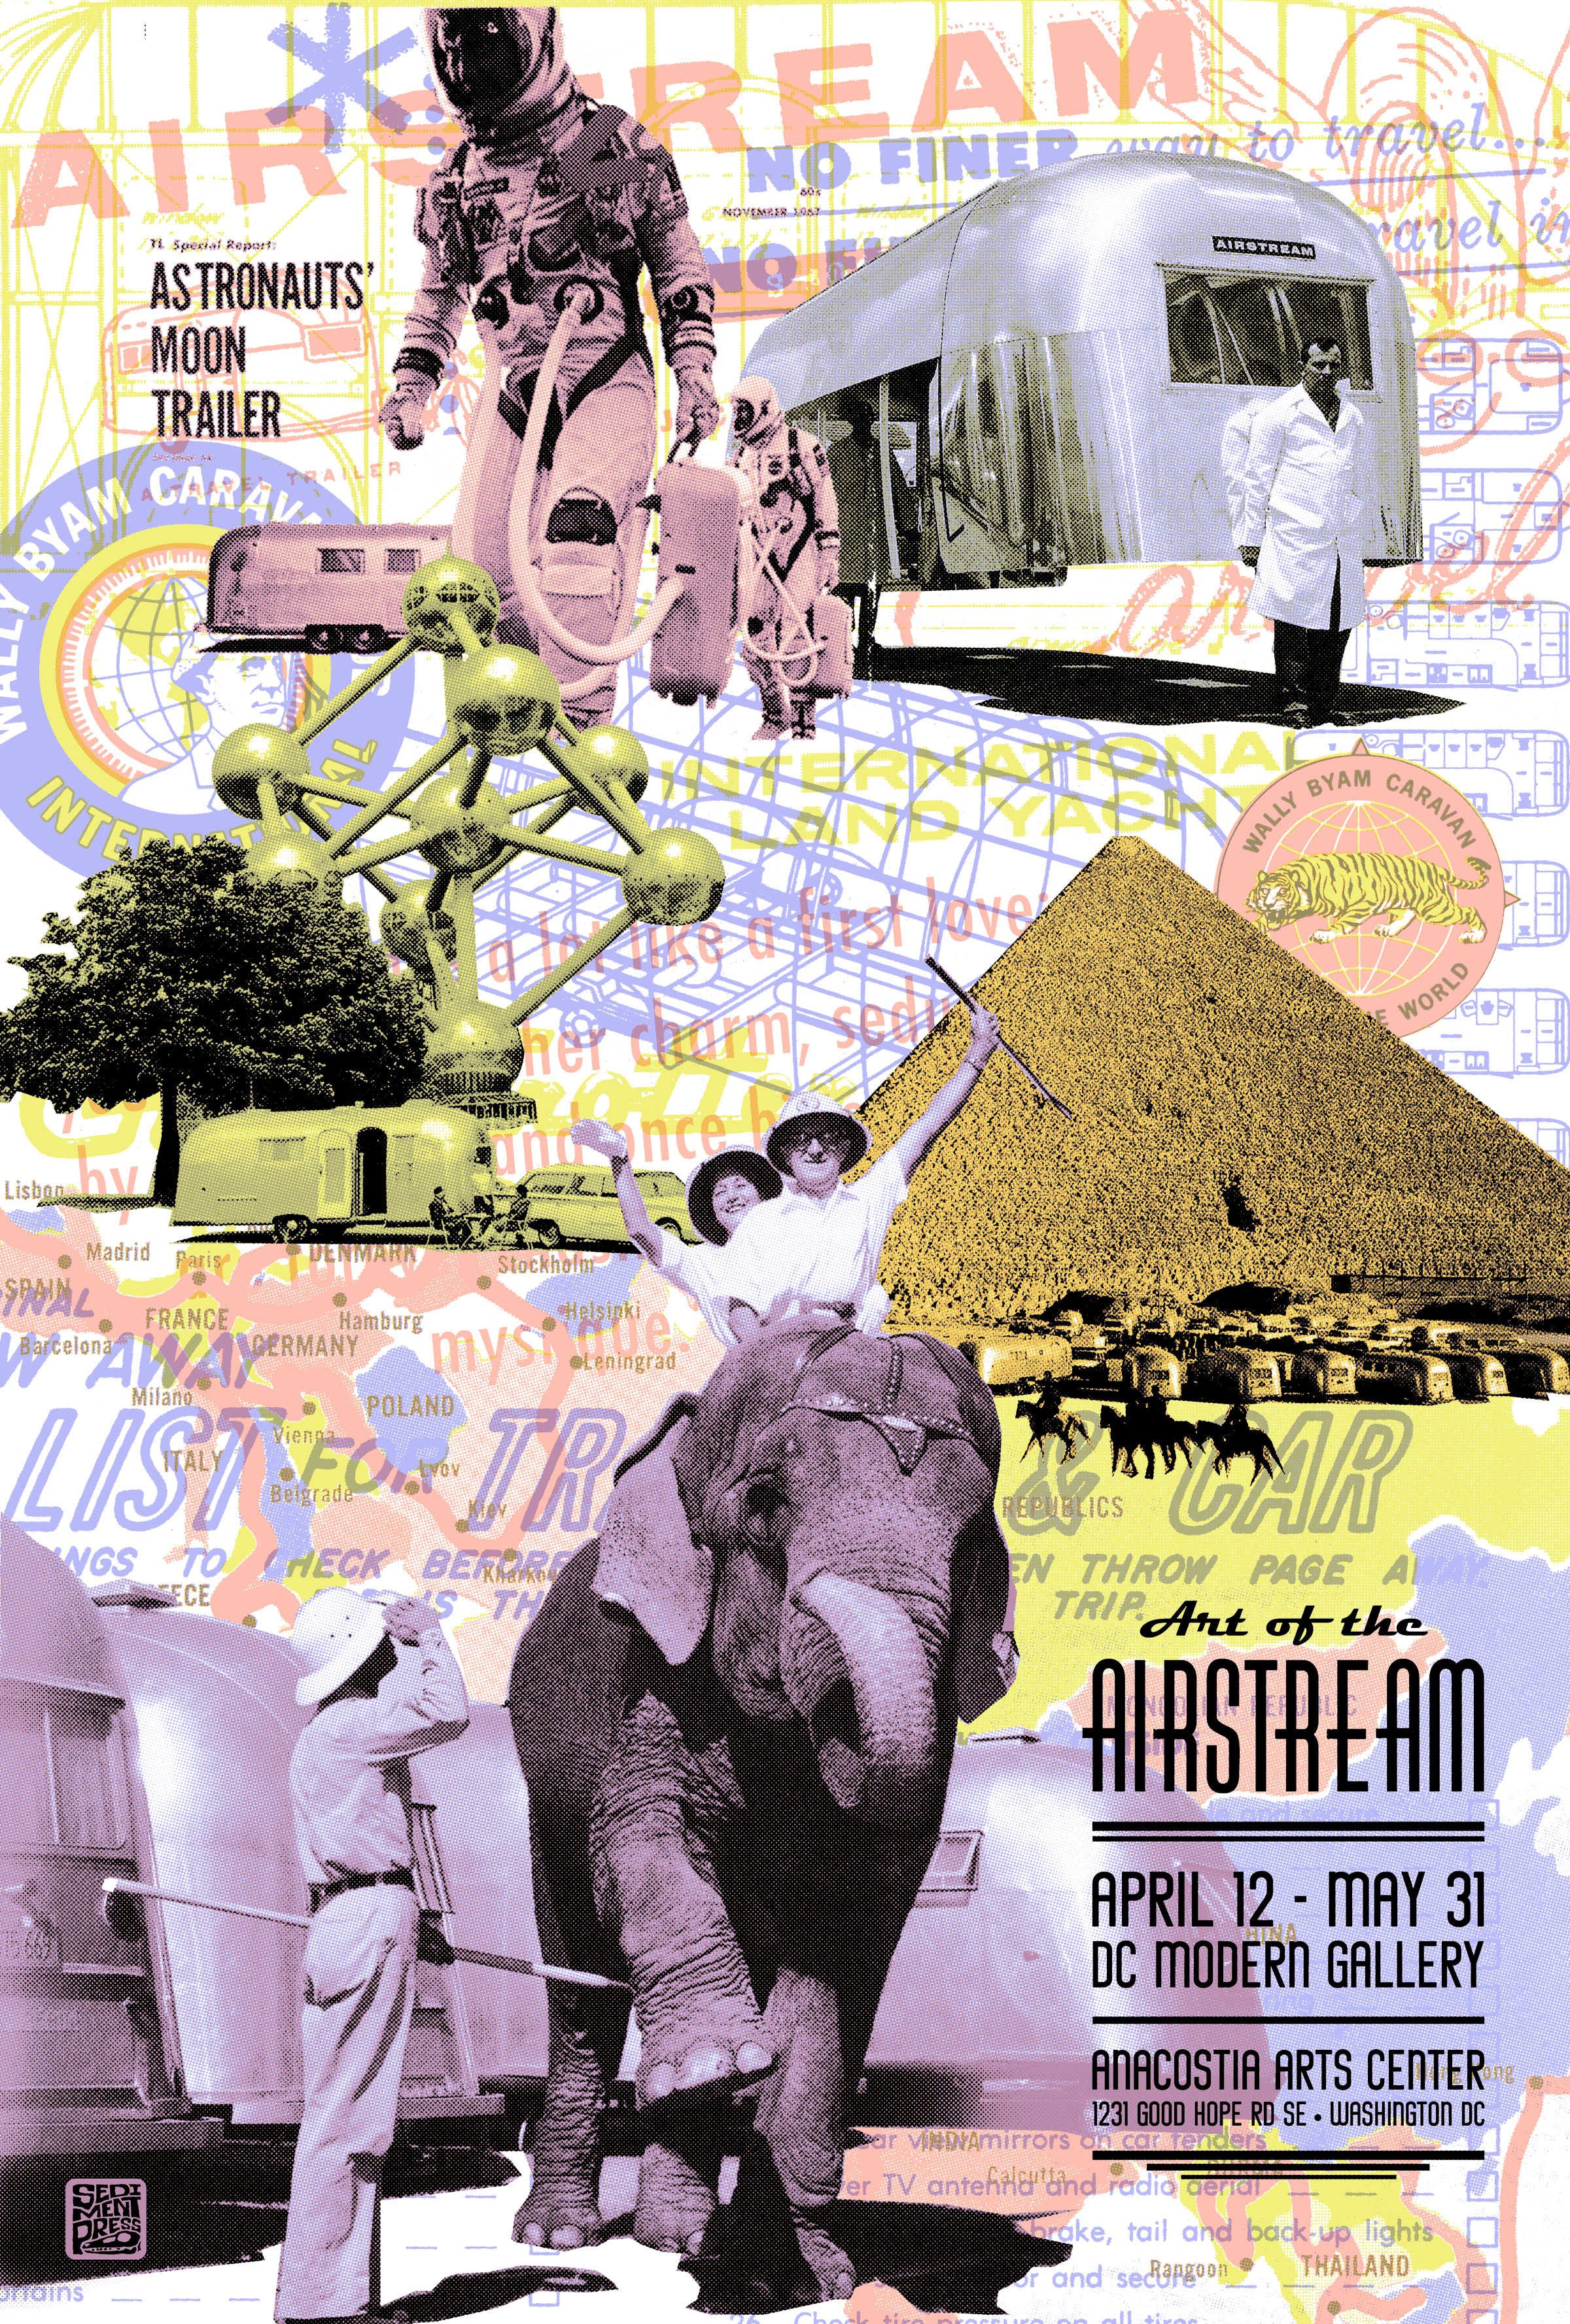 Art of the Airstream gallery opening poster 2014. Digital collage of Airstream trailers taken at landmarks around the world.